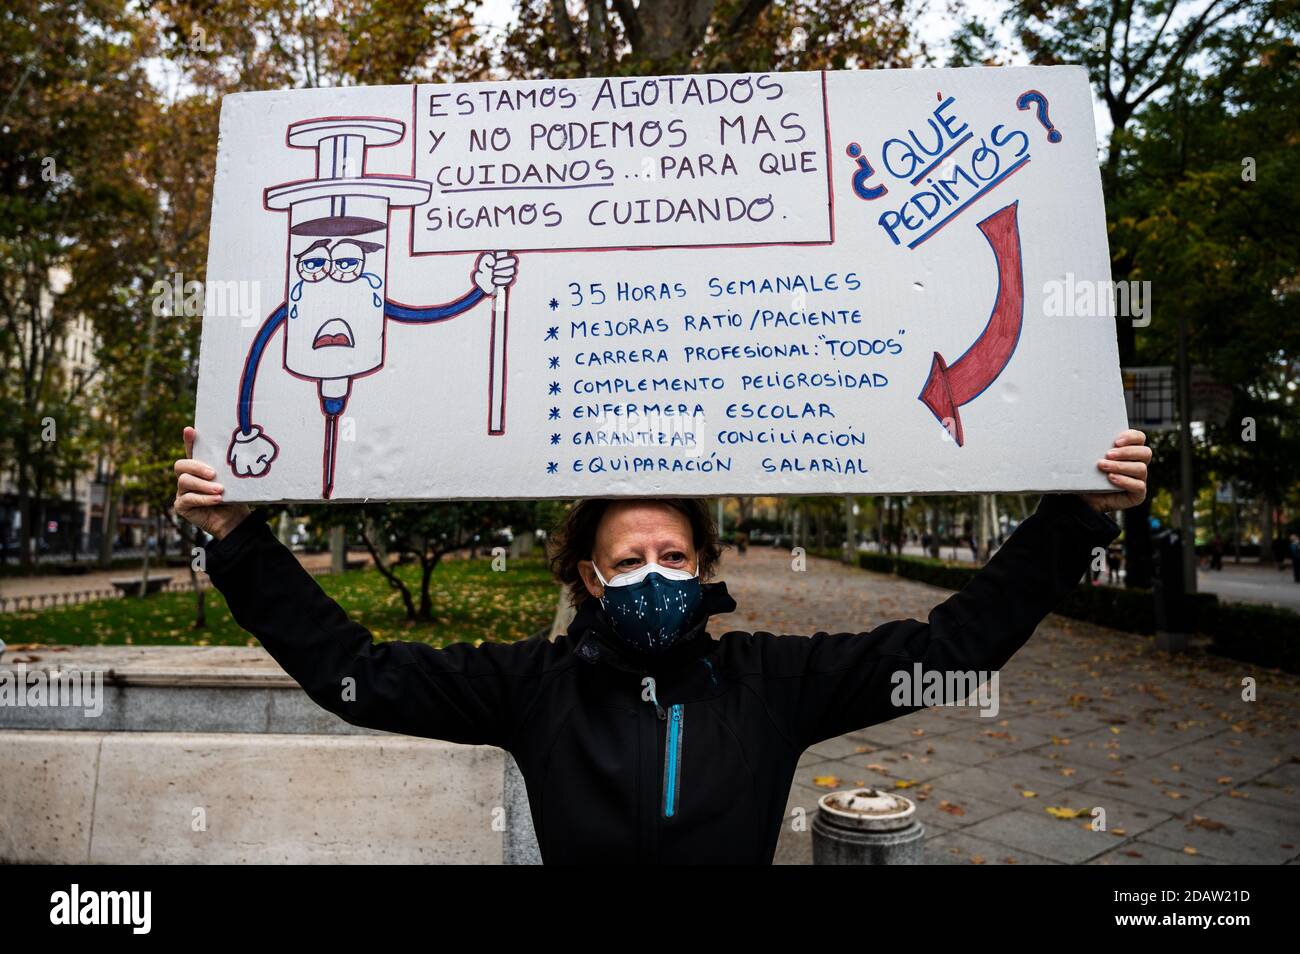 Madrid, Spain. 15th Nov, 2020. A nurse holds a placard showing nursing demands during a protest in front of the Healthcare Ministry where nurses are protesting demanding better working conditions and against the mistreatment of their sector during the Coronavirus (COVID-19) pandemic. Credit: Marcos del Mazo/Alamy Live News Stock Photo